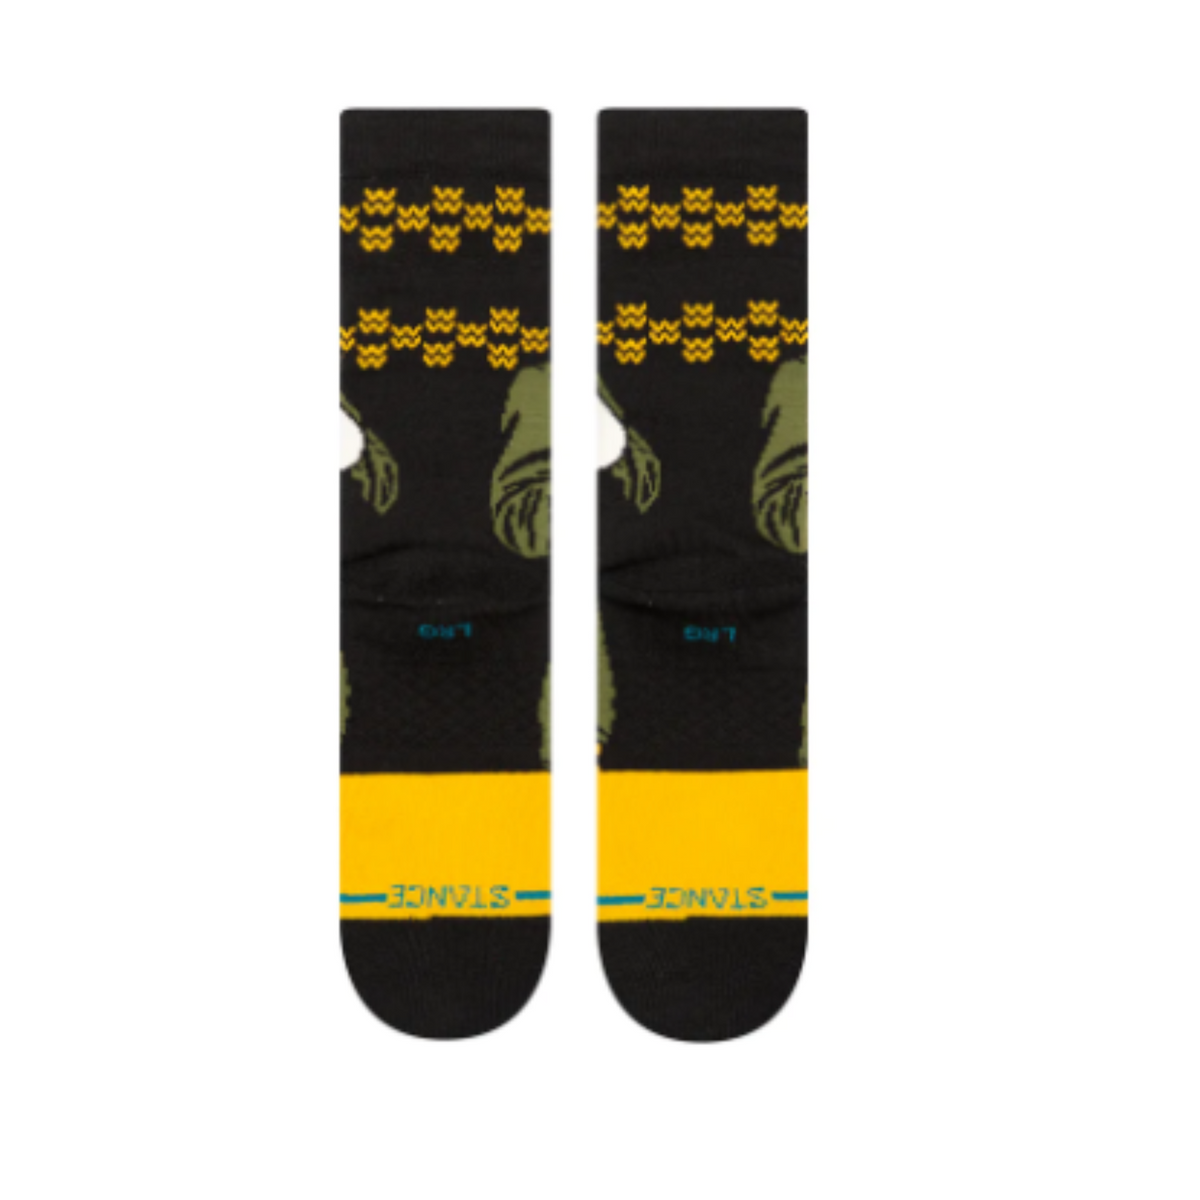 Bottom of Stance Smiling&#39;s My Favorite men&#39;s crew sock featuring Buddy the Christmas Elf. 